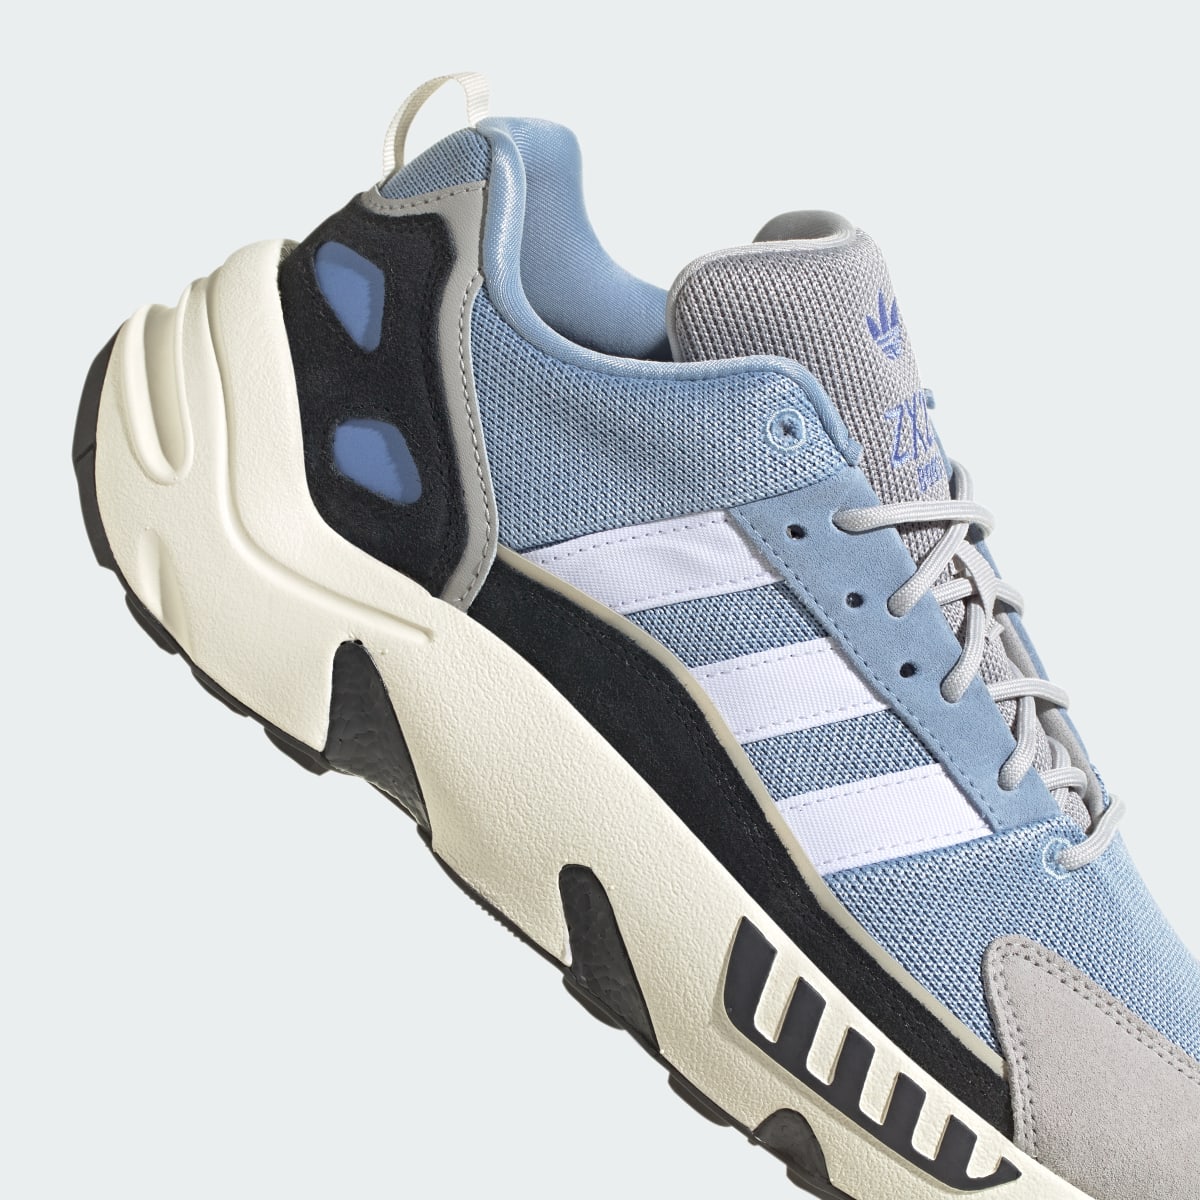 Adidas ZX 22 BOOST Shoes. 10